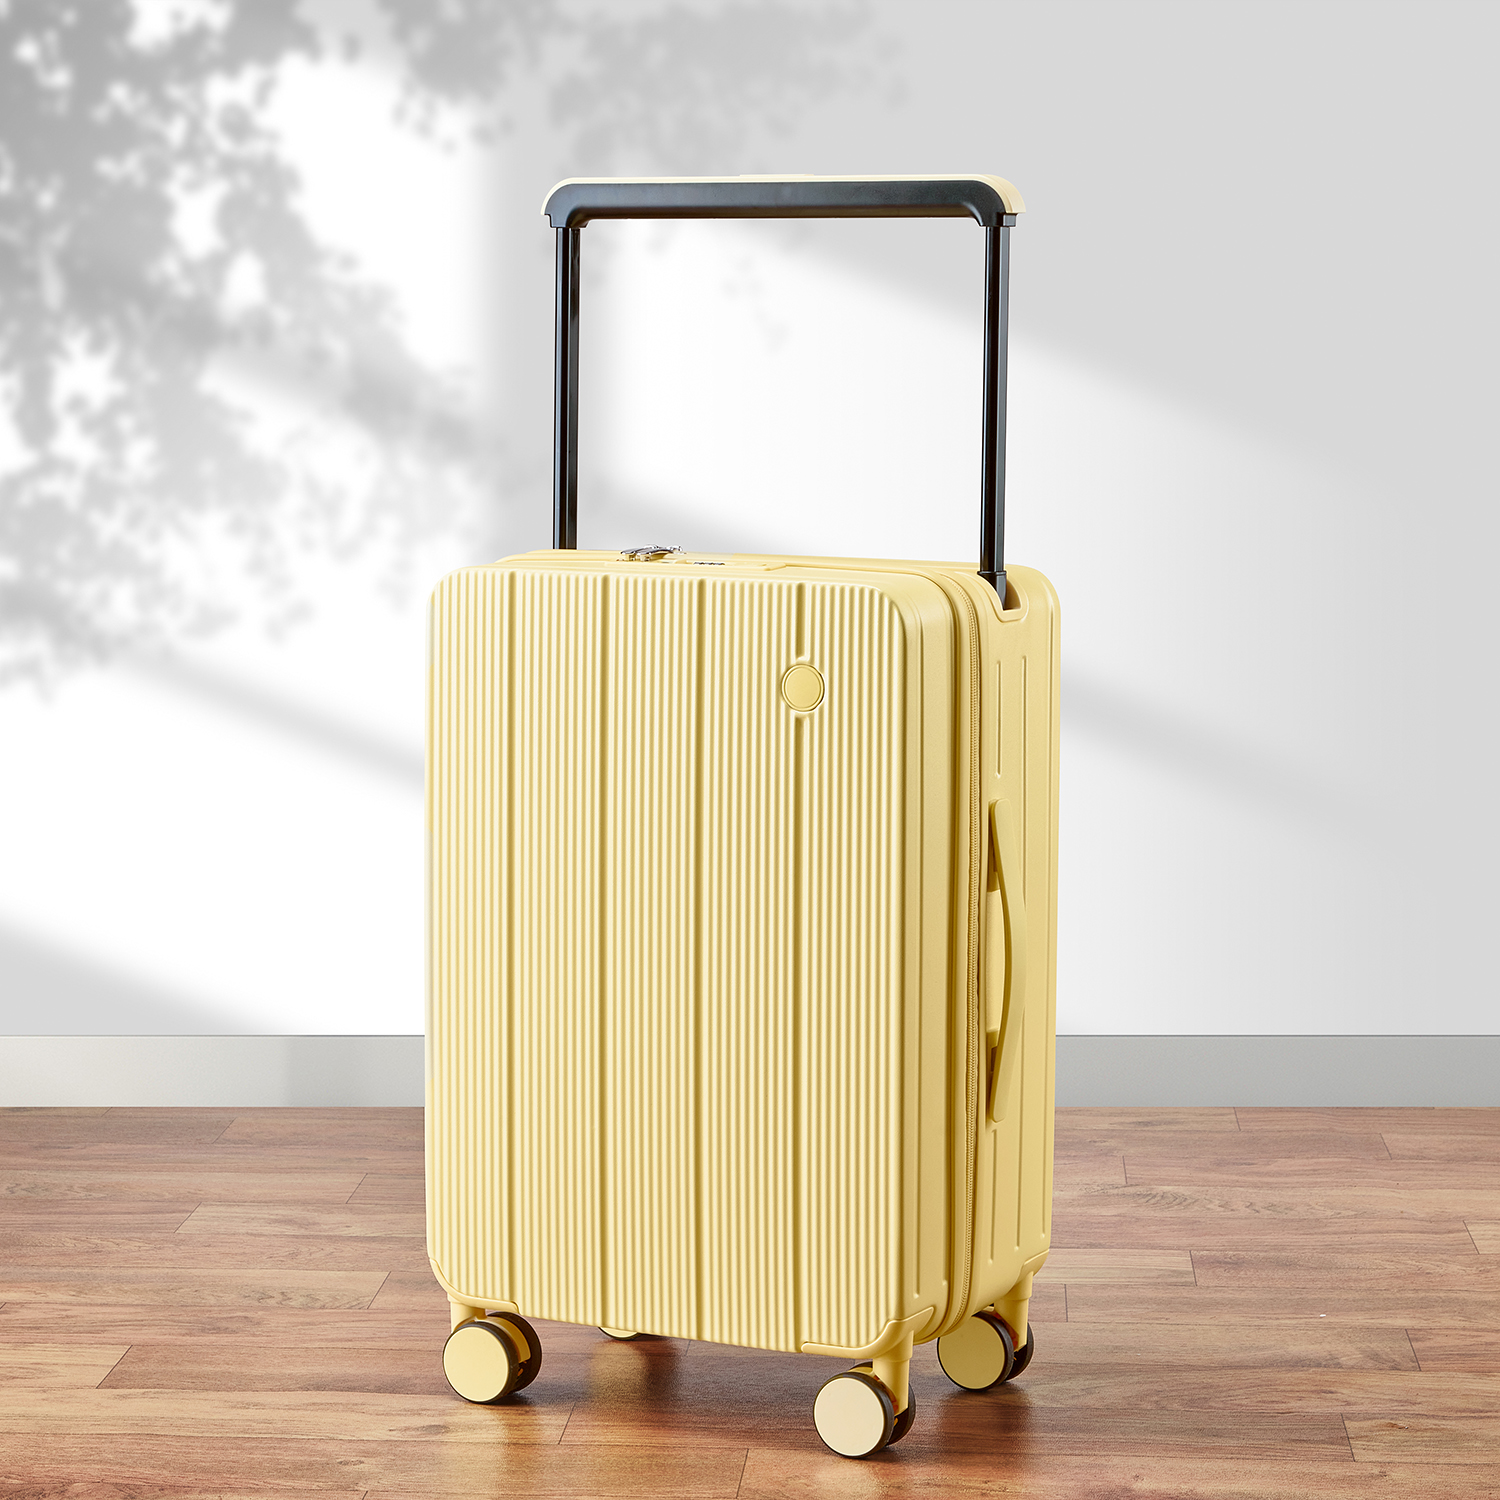 Newest Design Wide Trolley Yellow